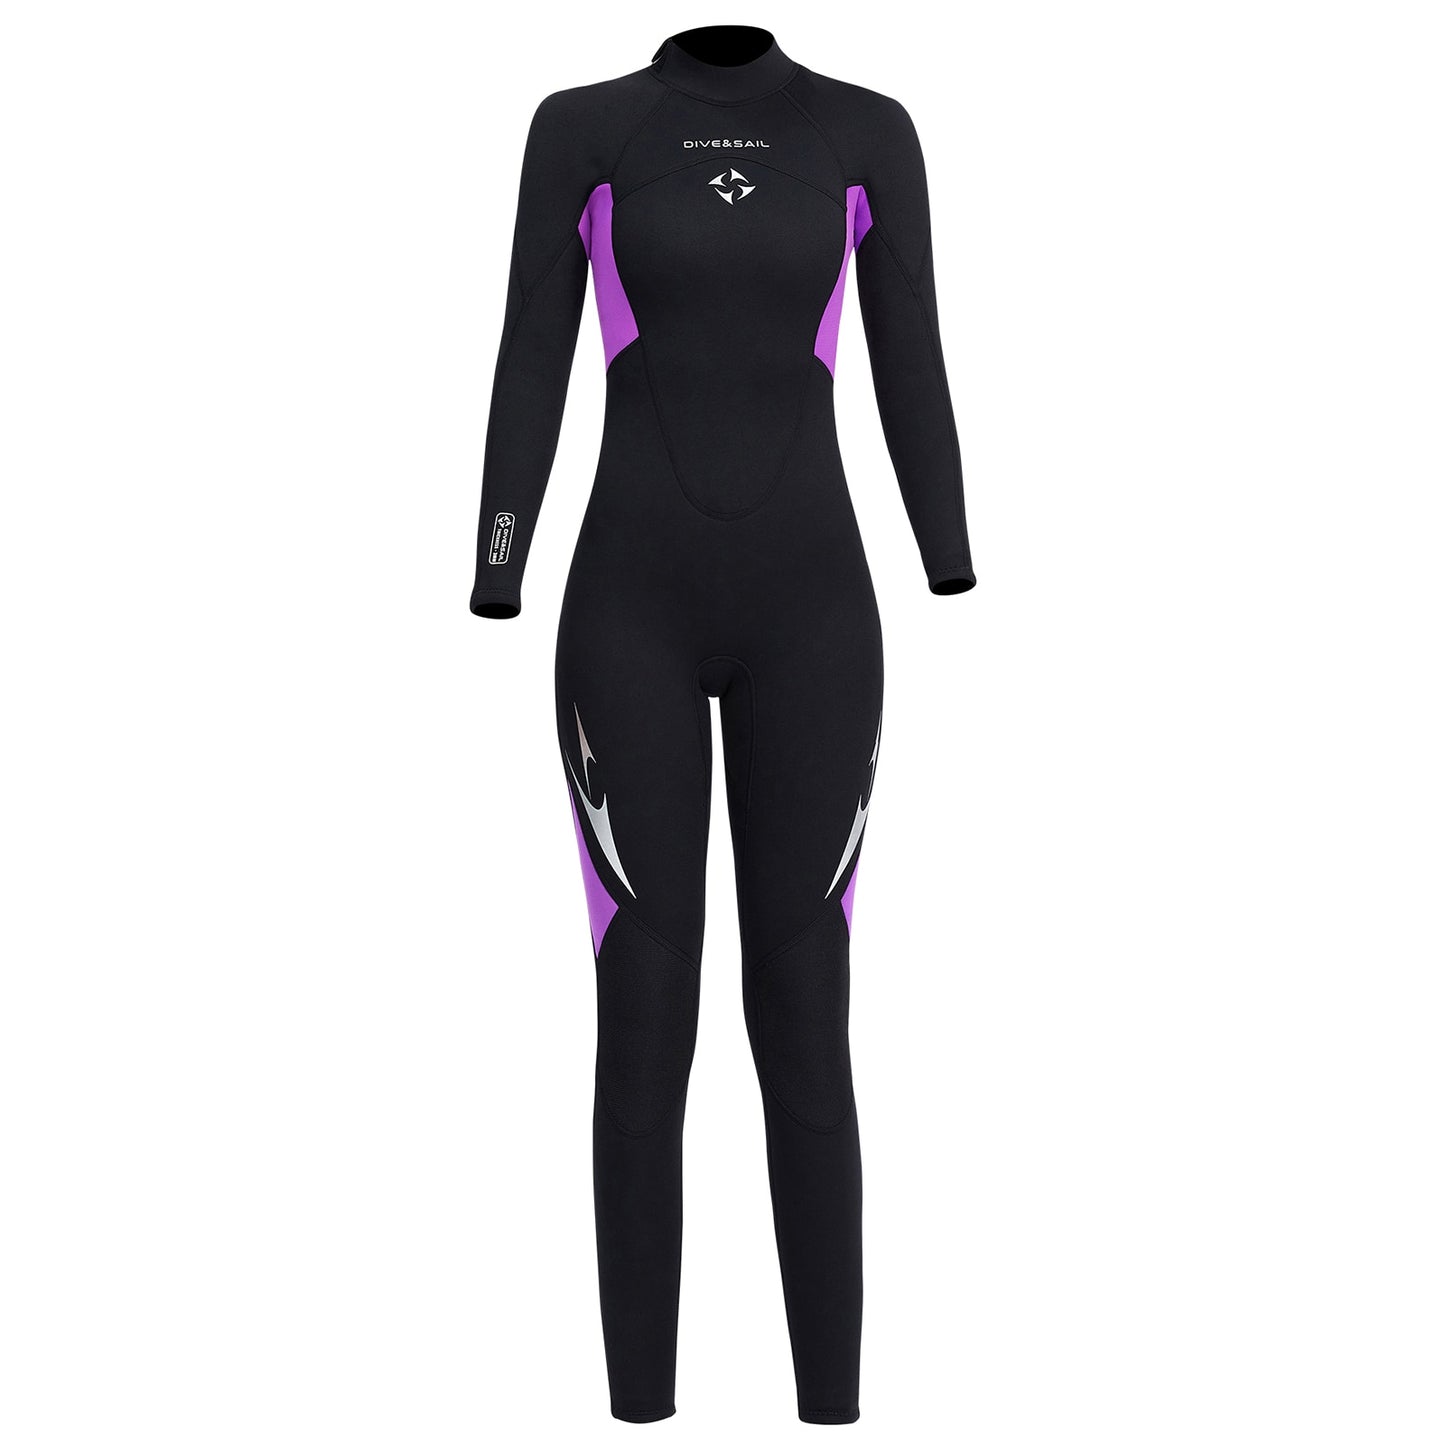 3mm Neoprene Wetsuits Full Body Scuba Diving Suits for Women Snorkeling Surfing Swimming Long Sleeve Keep Warm for Water Sports - adamshealthstore